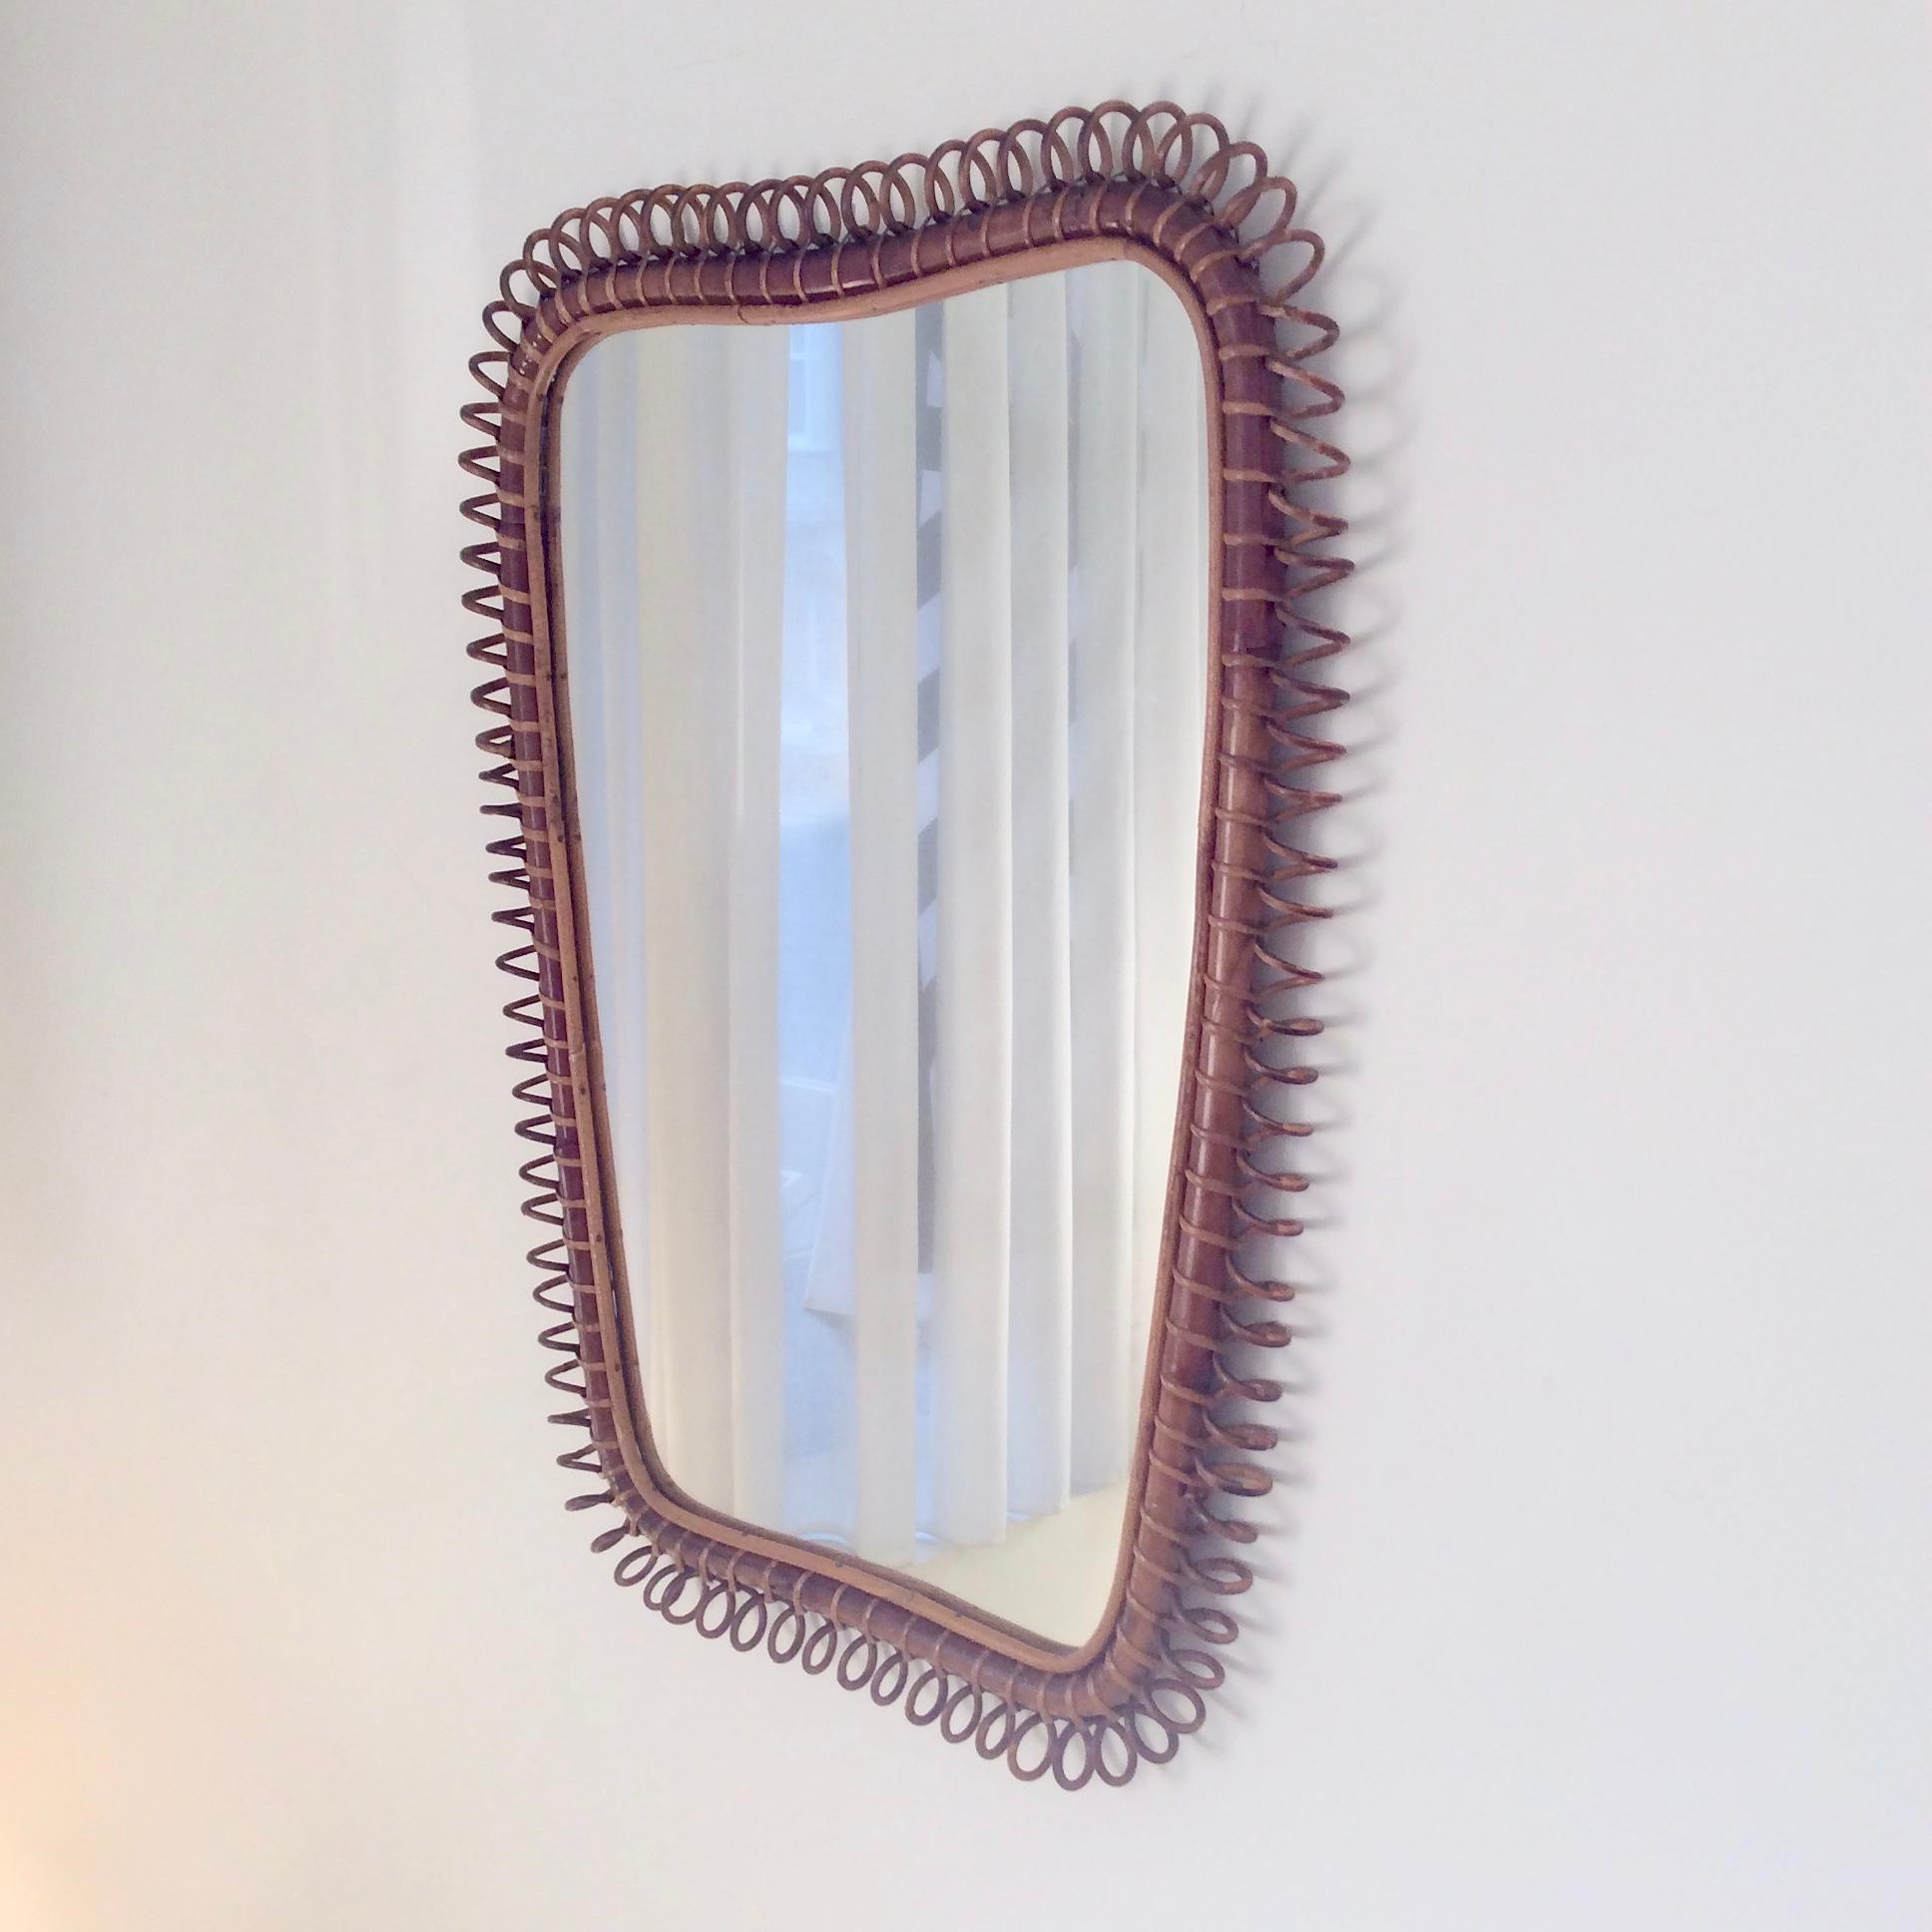 Rare and elegant large rattan and bamboo mirror, design attributed to Gio Ponti, circa 1950, Italy.
Decorative rattan spiral on bamboo frame.
Wood back.
Dimensions: 91 cm H, 71 cm W, 5 cm D.
Good original condition.
All purchases are covered by our